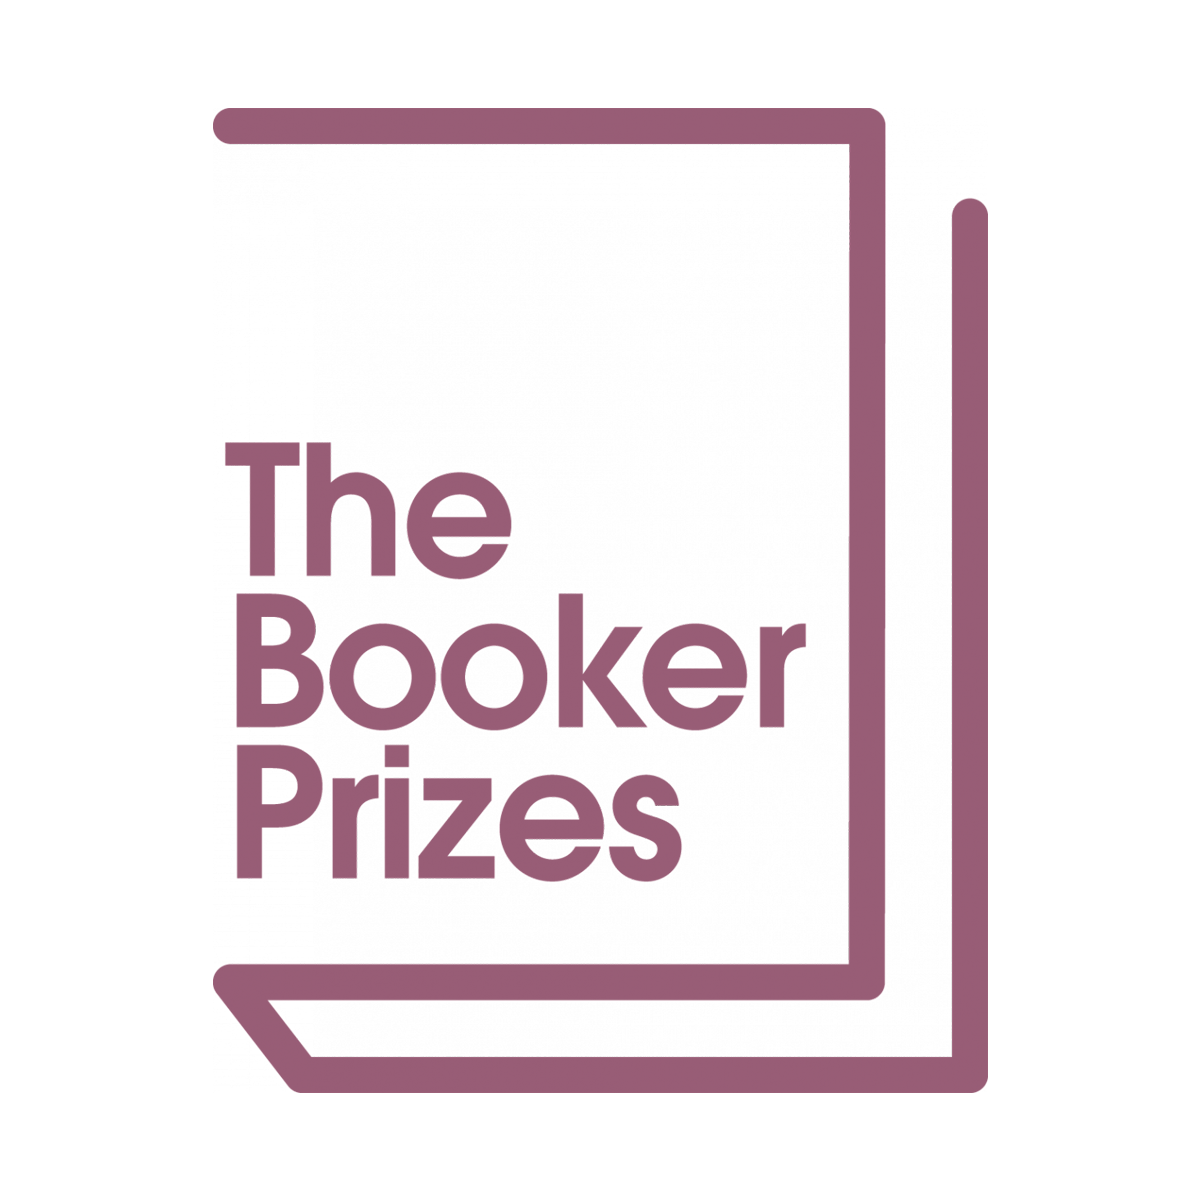 The Booker Prizes logo. Click here to access this resource.